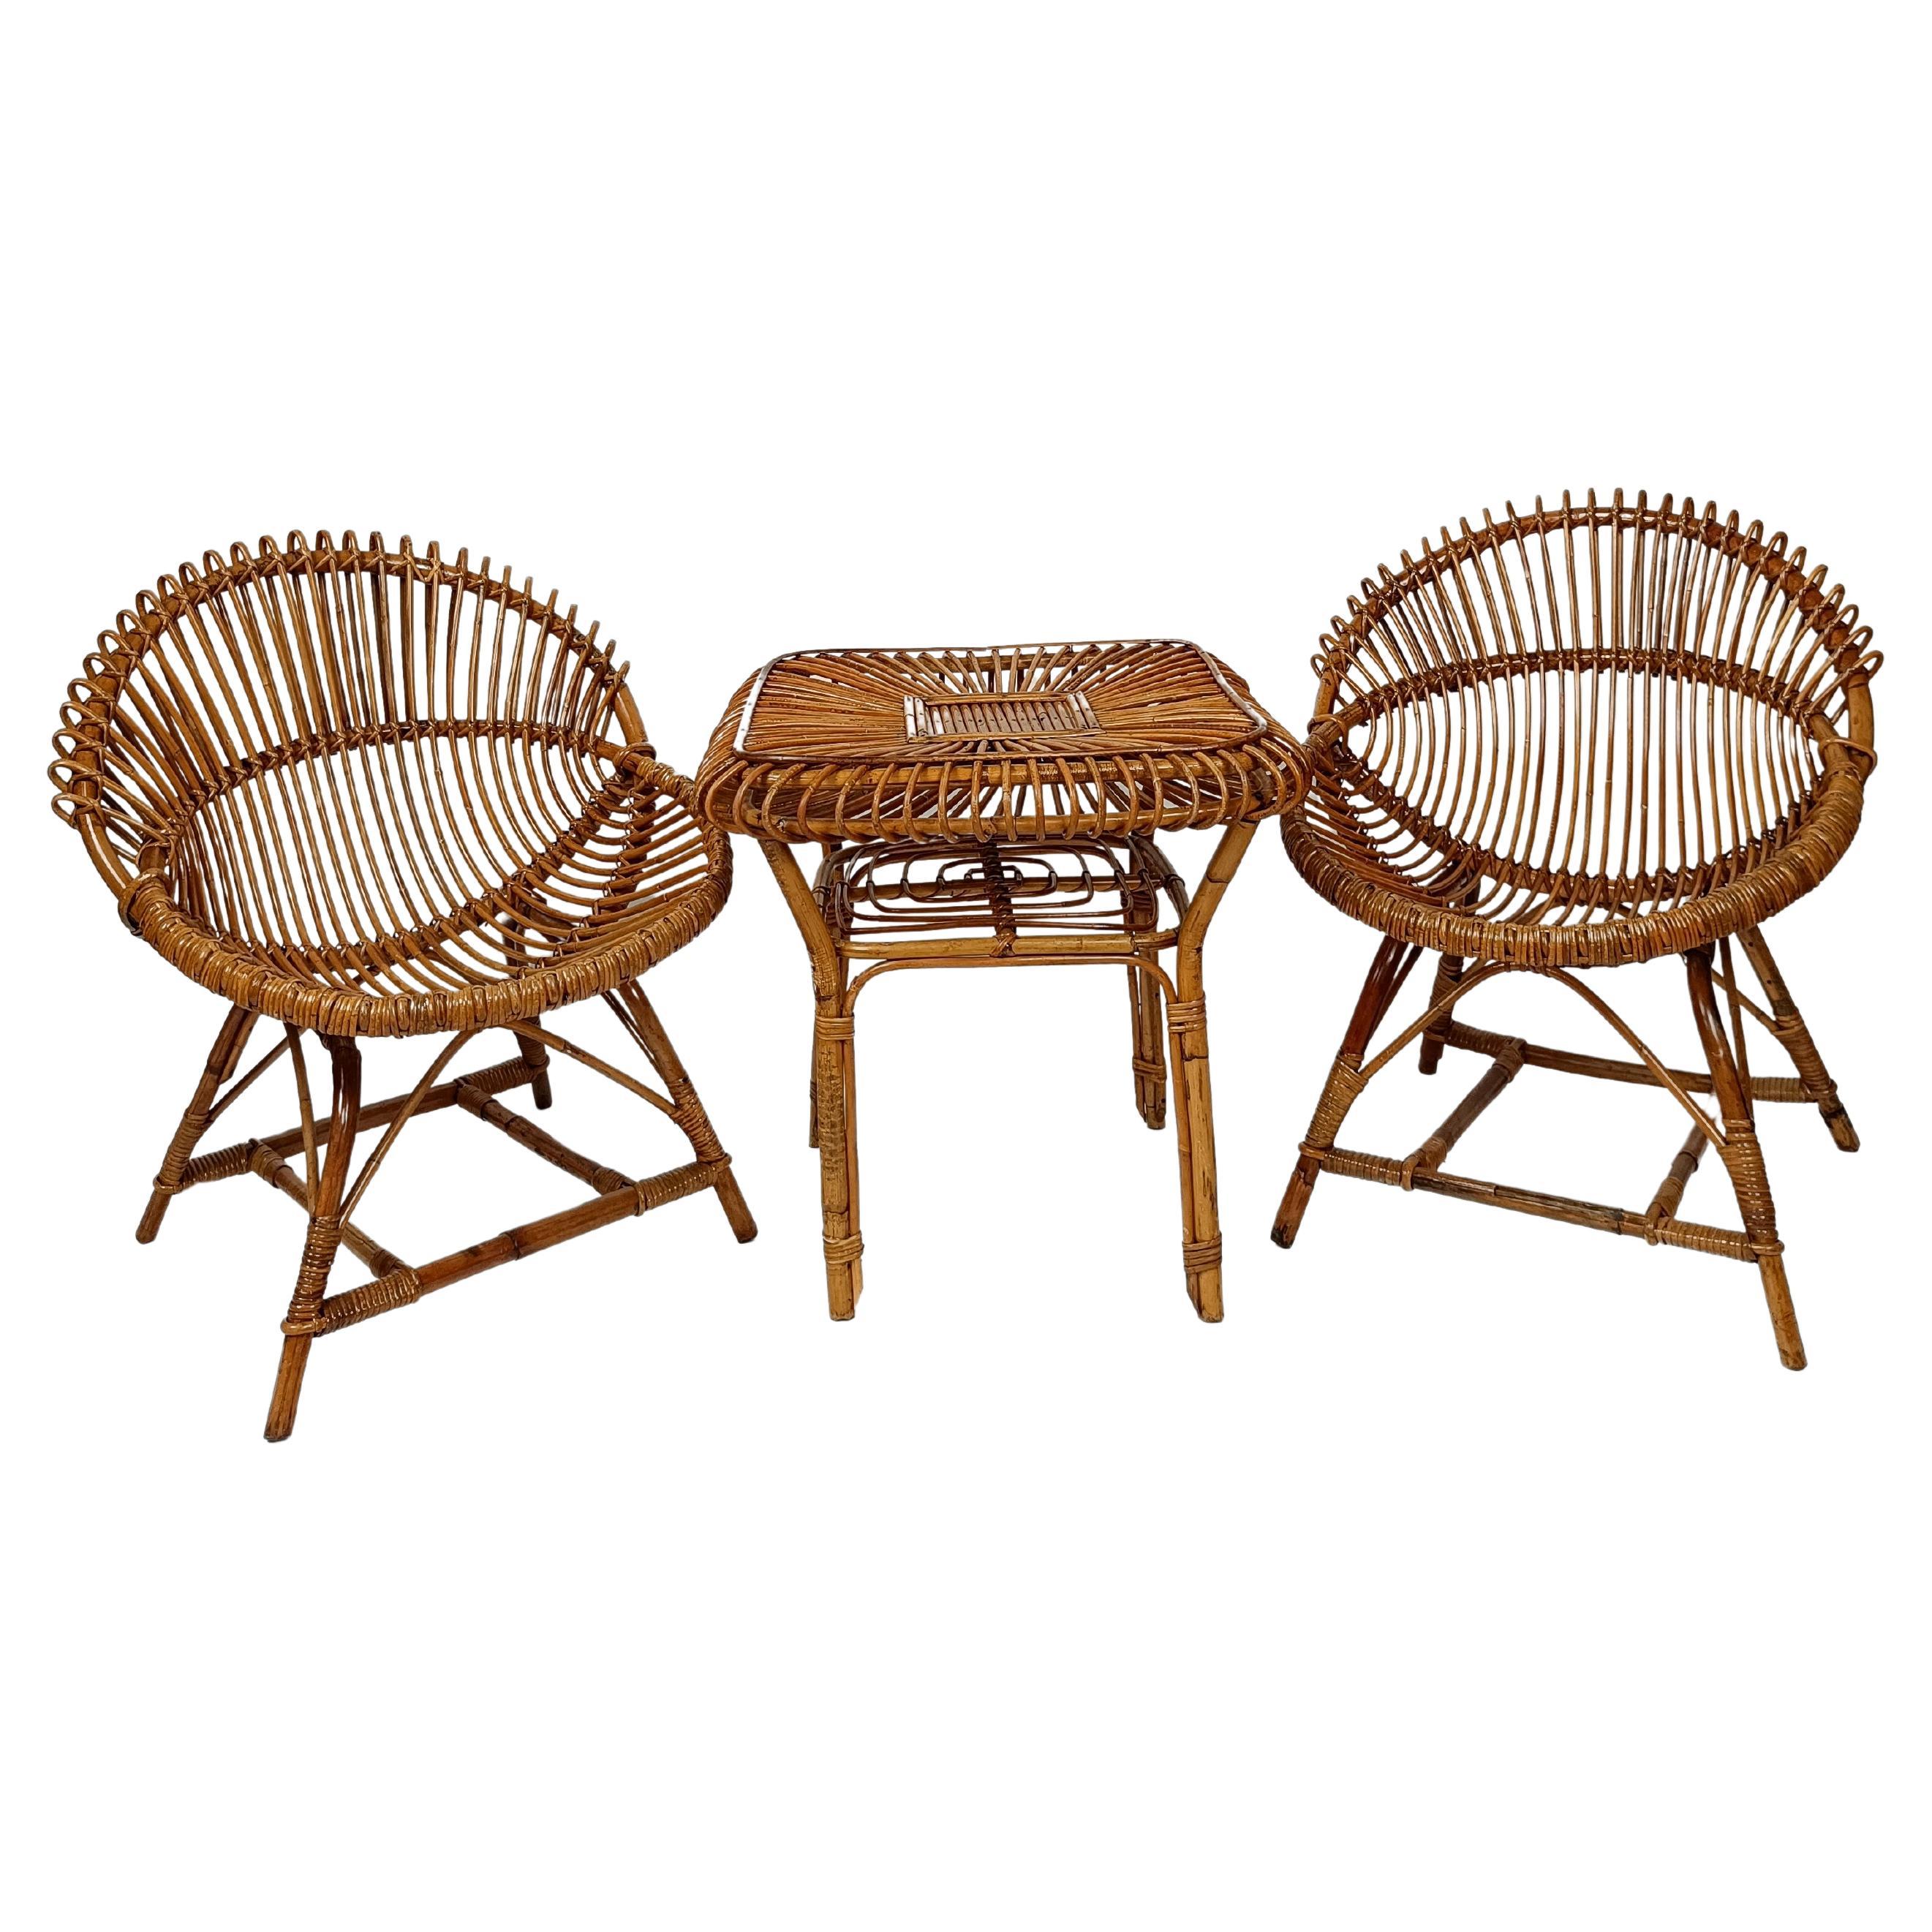 Vintage Cane and Rattan Set of 2 shell-shaped Armchairs with Coffe Table, 1960s For Sale